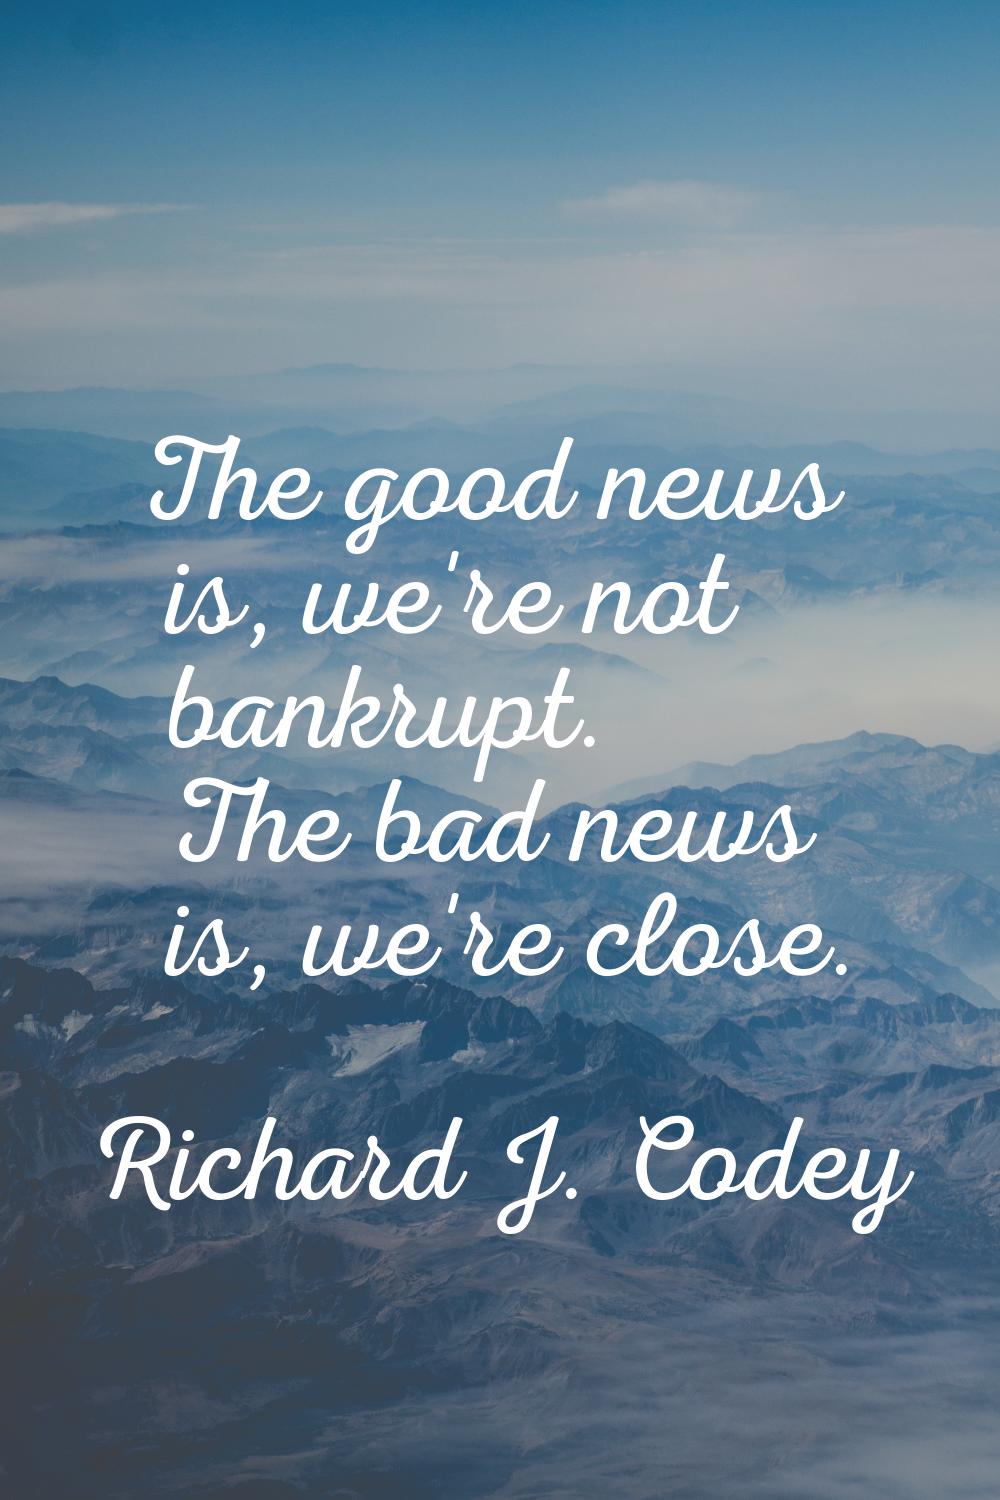 The good news is, we're not bankrupt. The bad news is, we're close.